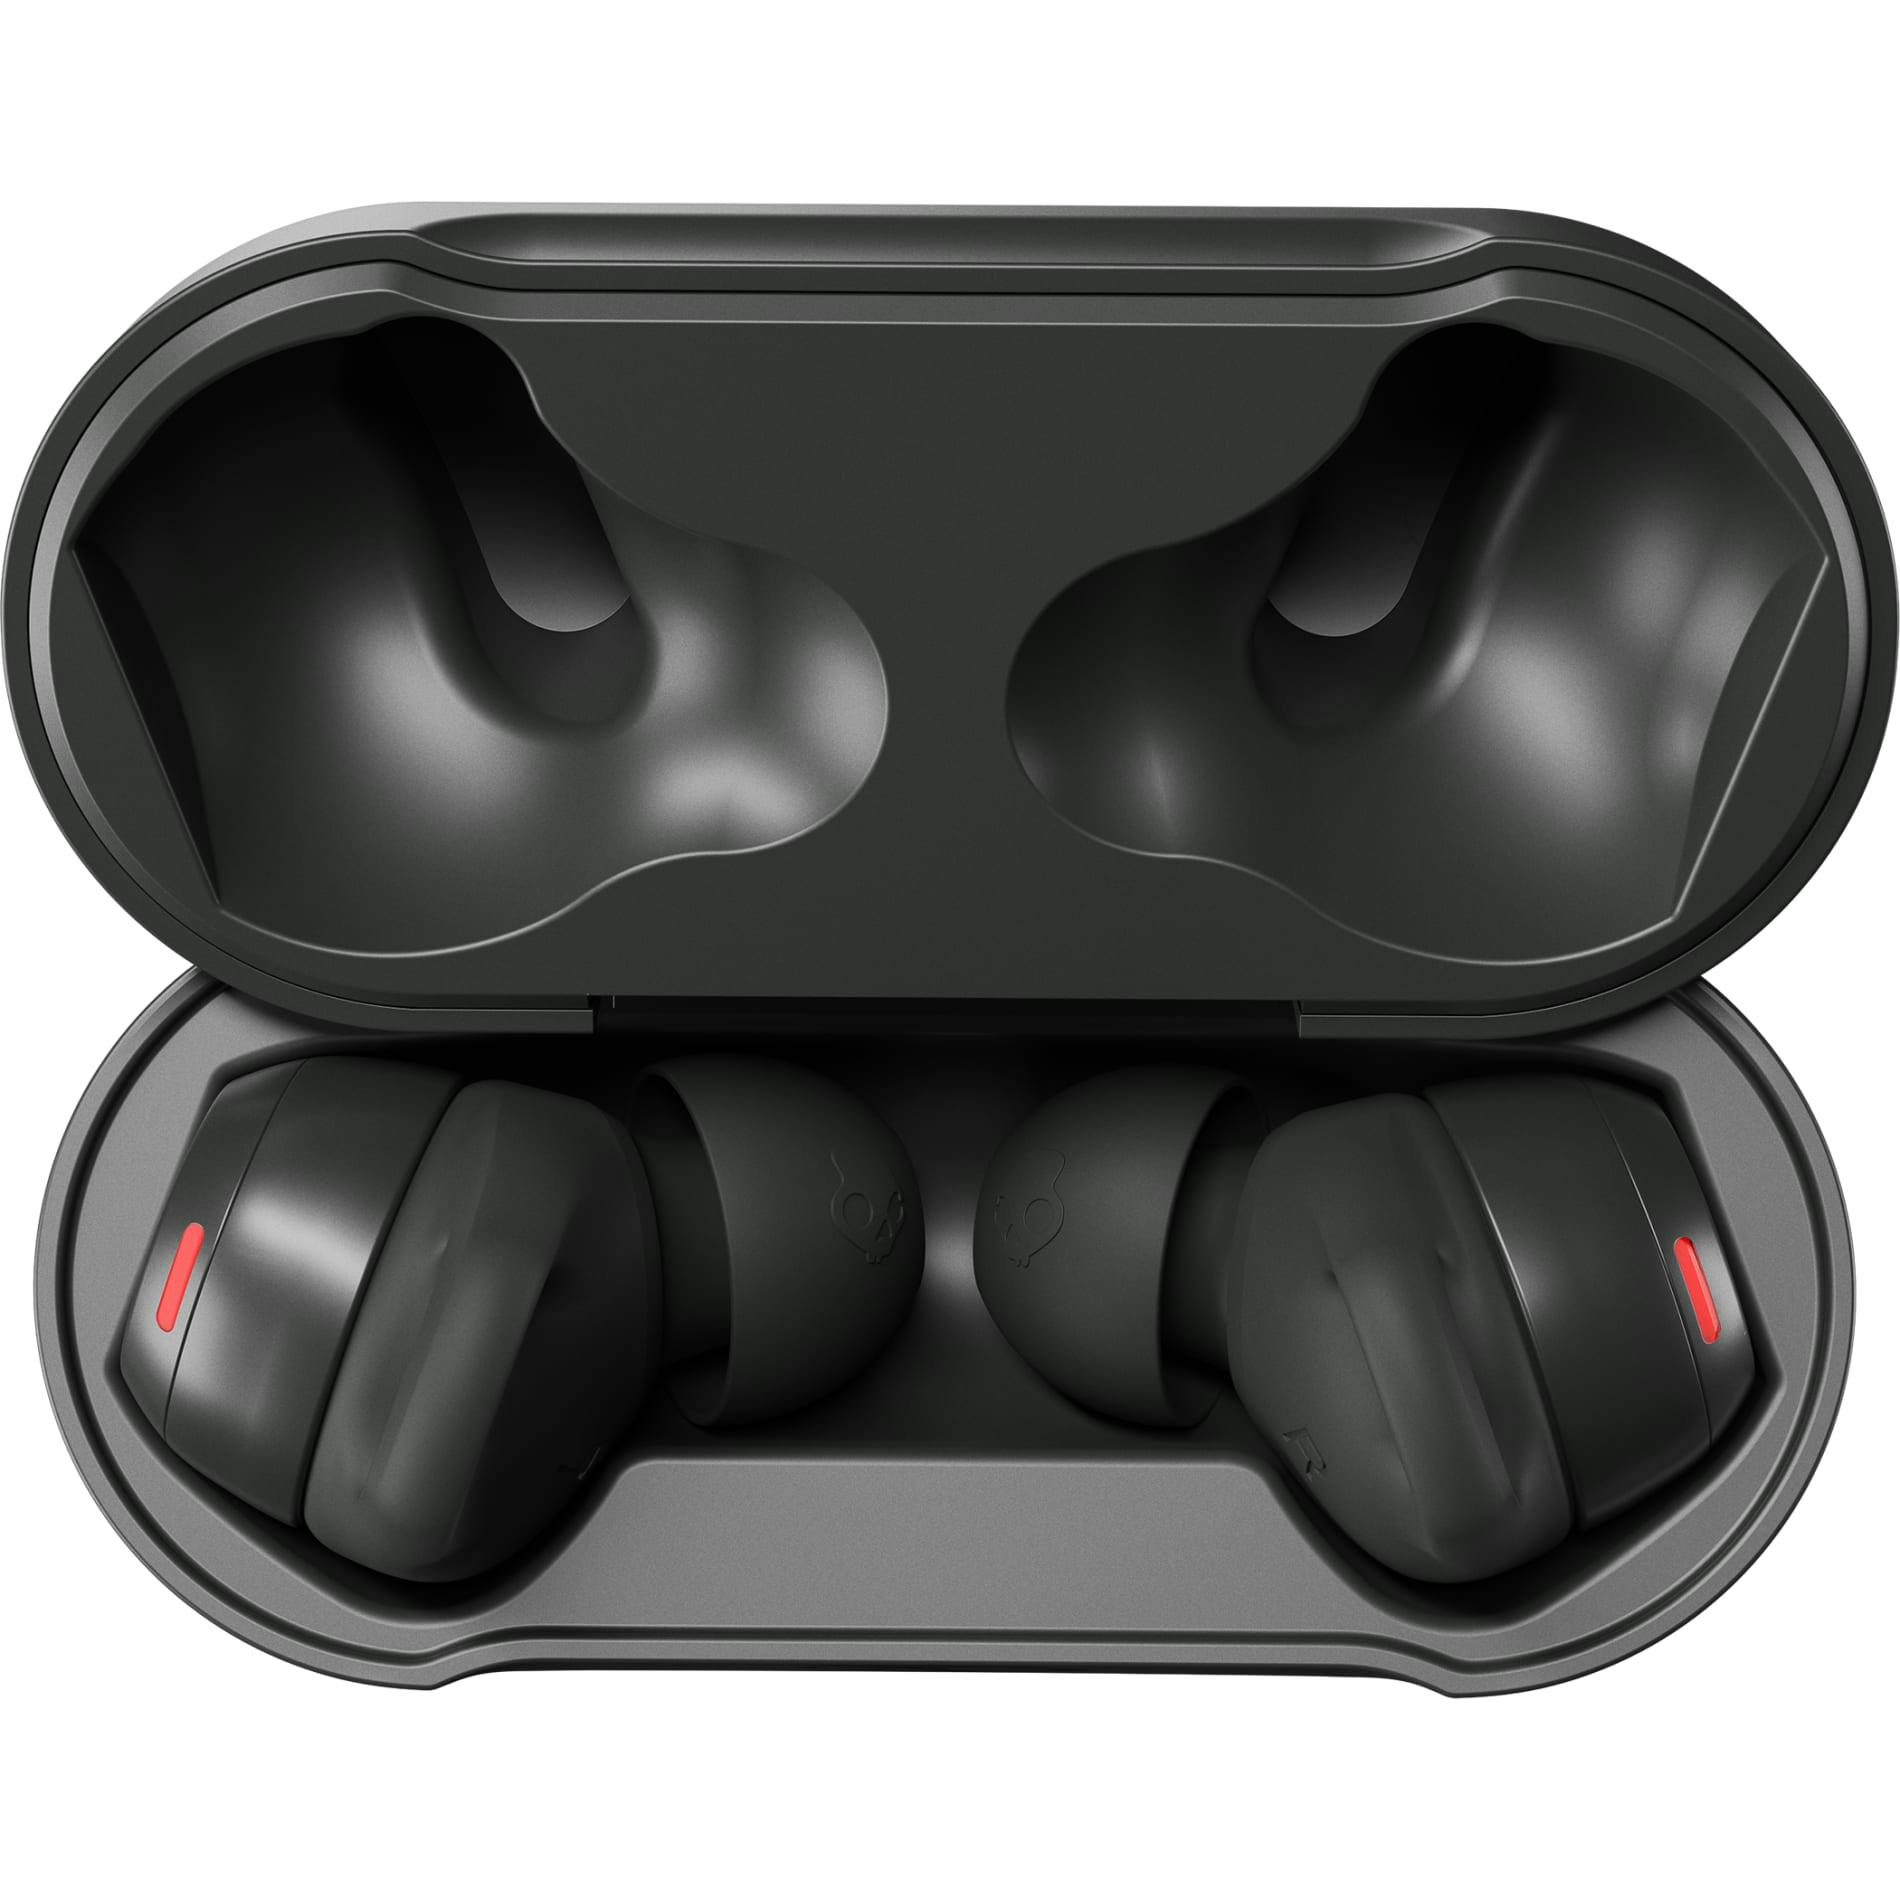 Skullcandy Indy ANC True Wireless Earbuds - additional Image 2